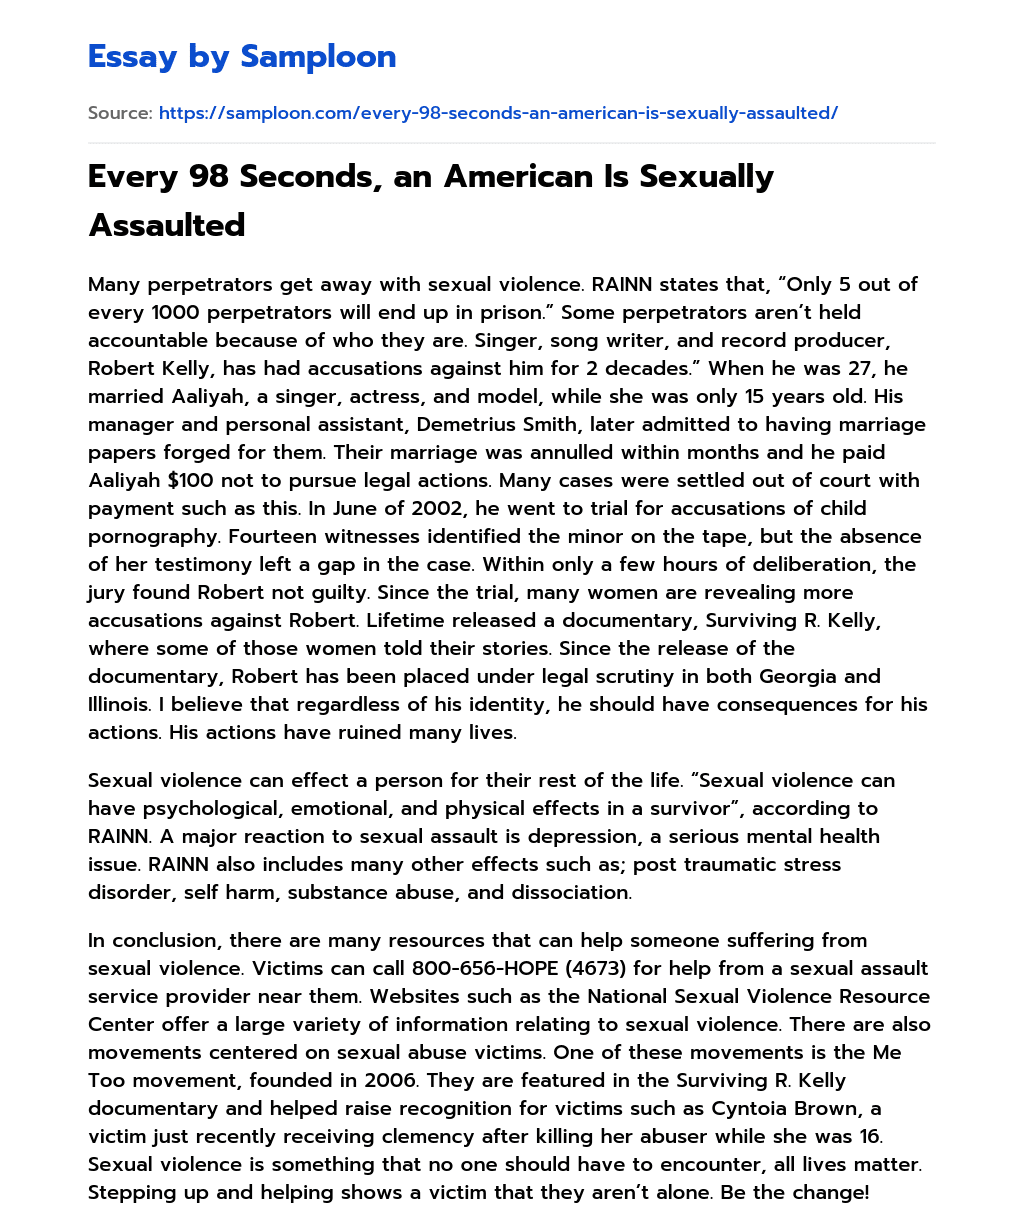 Every 98 Seconds, an American Is Sexually Assaulted essay